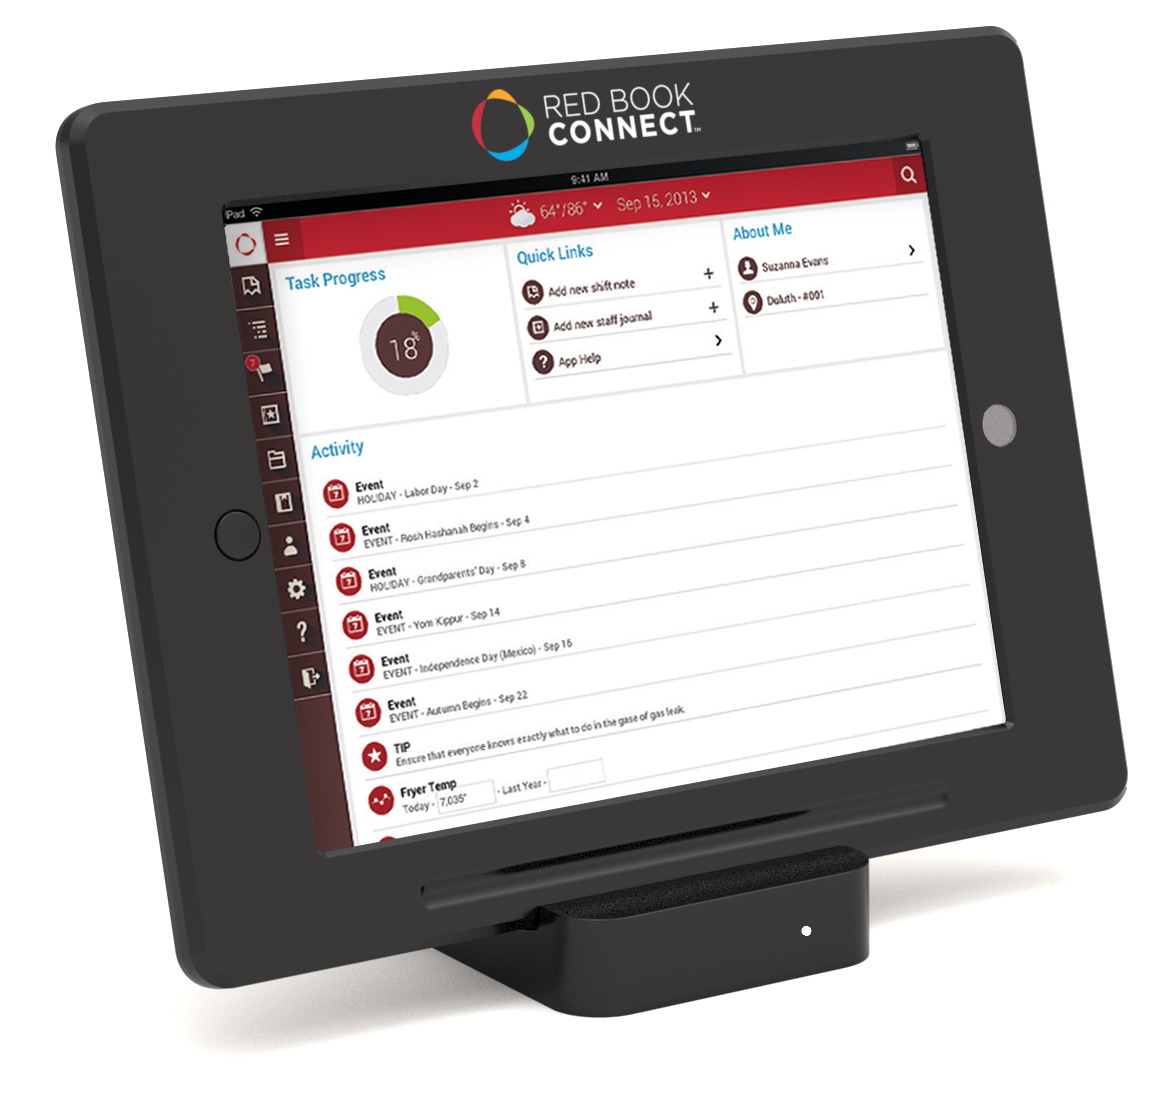 Red Book Connect debuted their newest mobile product, the Digital Red Book, and an optional ruggedized iPad built to withstand the harsh operating conditions of a restaurant.